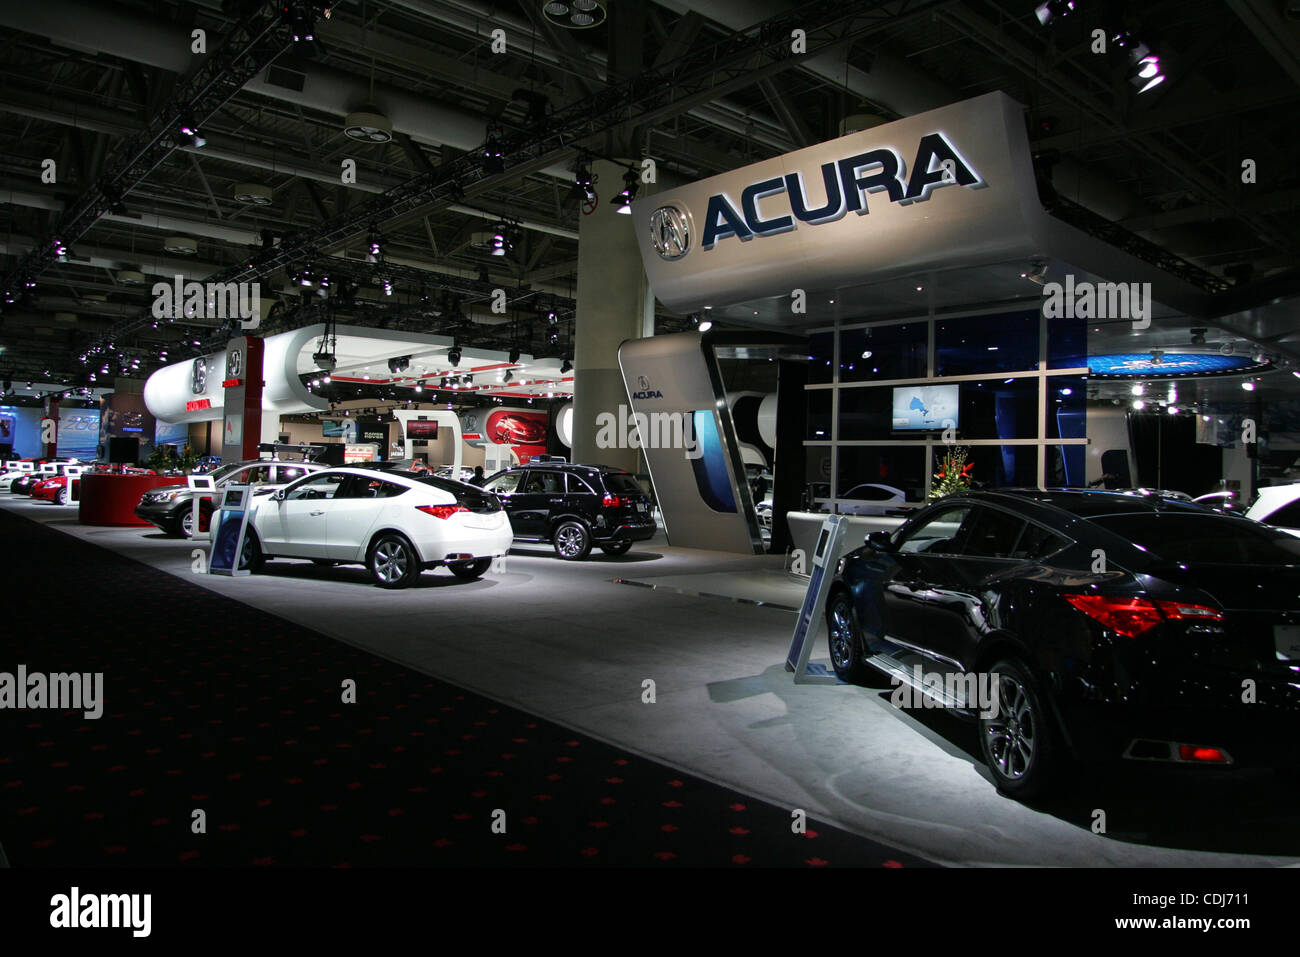 Feb. 17, 2011 - Toronto, Ontario, Canada - The Acura display at the Canadian International Auto Show media day at the Metro Convention Centre in Toronto. (Credit Image: © Steve Dormer/Southcreek Global/ZUMAPRESS.com) Stock Photo